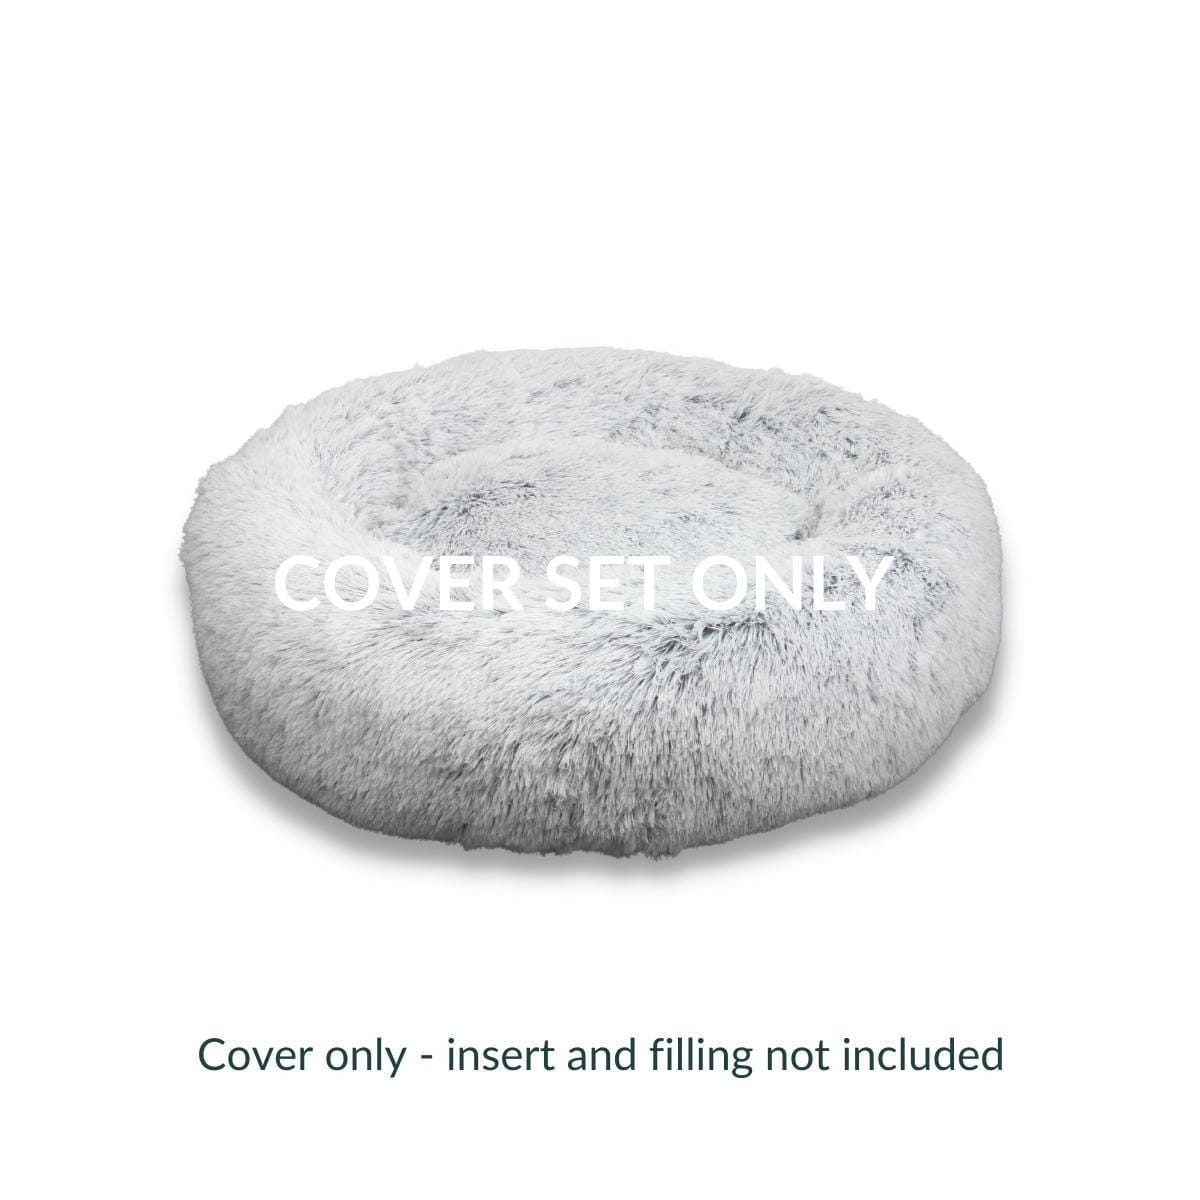 Calming Dog Bed Spare Cover - The Calming Dog Bed